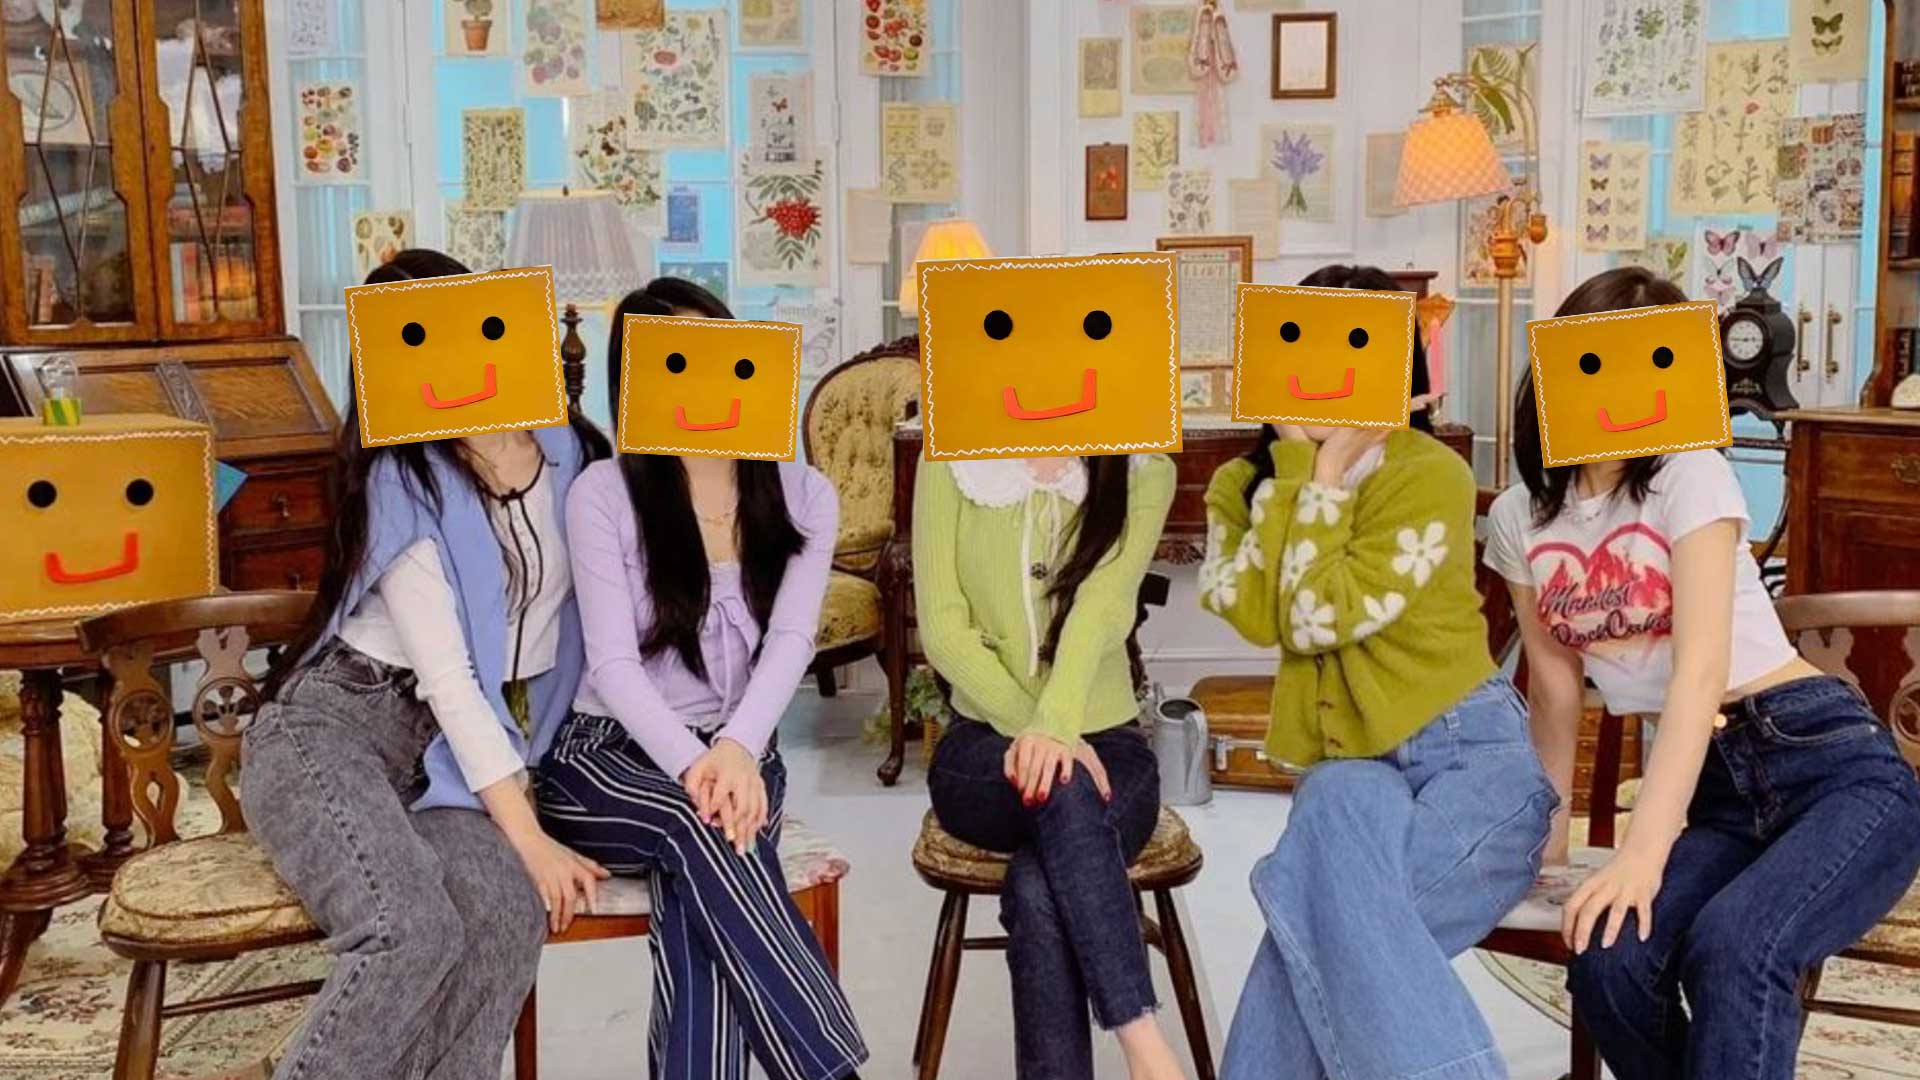 A disguised image of a K-Pop group